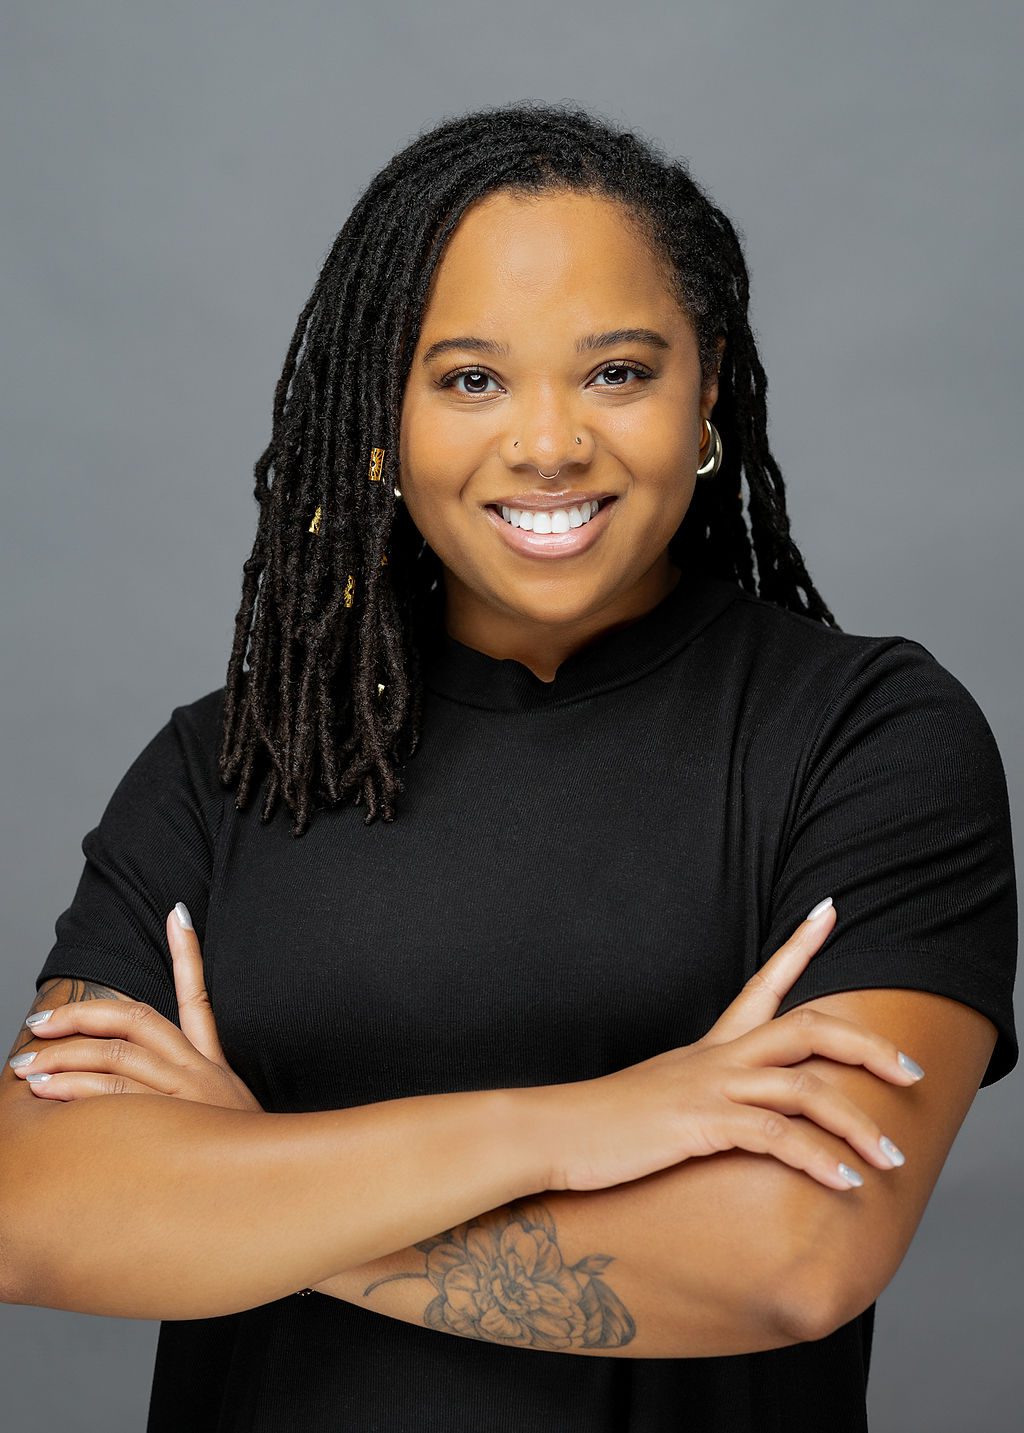 This photo is a professional headshot of Brittany Parks. She is a Black woman with medium-length black locs. She is wearing a simple black blouse, gold earrings, and has a nose ring, two nose studs, and a few gold loc jewelry pieces in her hair. She also has an intricate all-black tattoo of a flower on her left forearm. She is smiling and crossing her arms confidently.